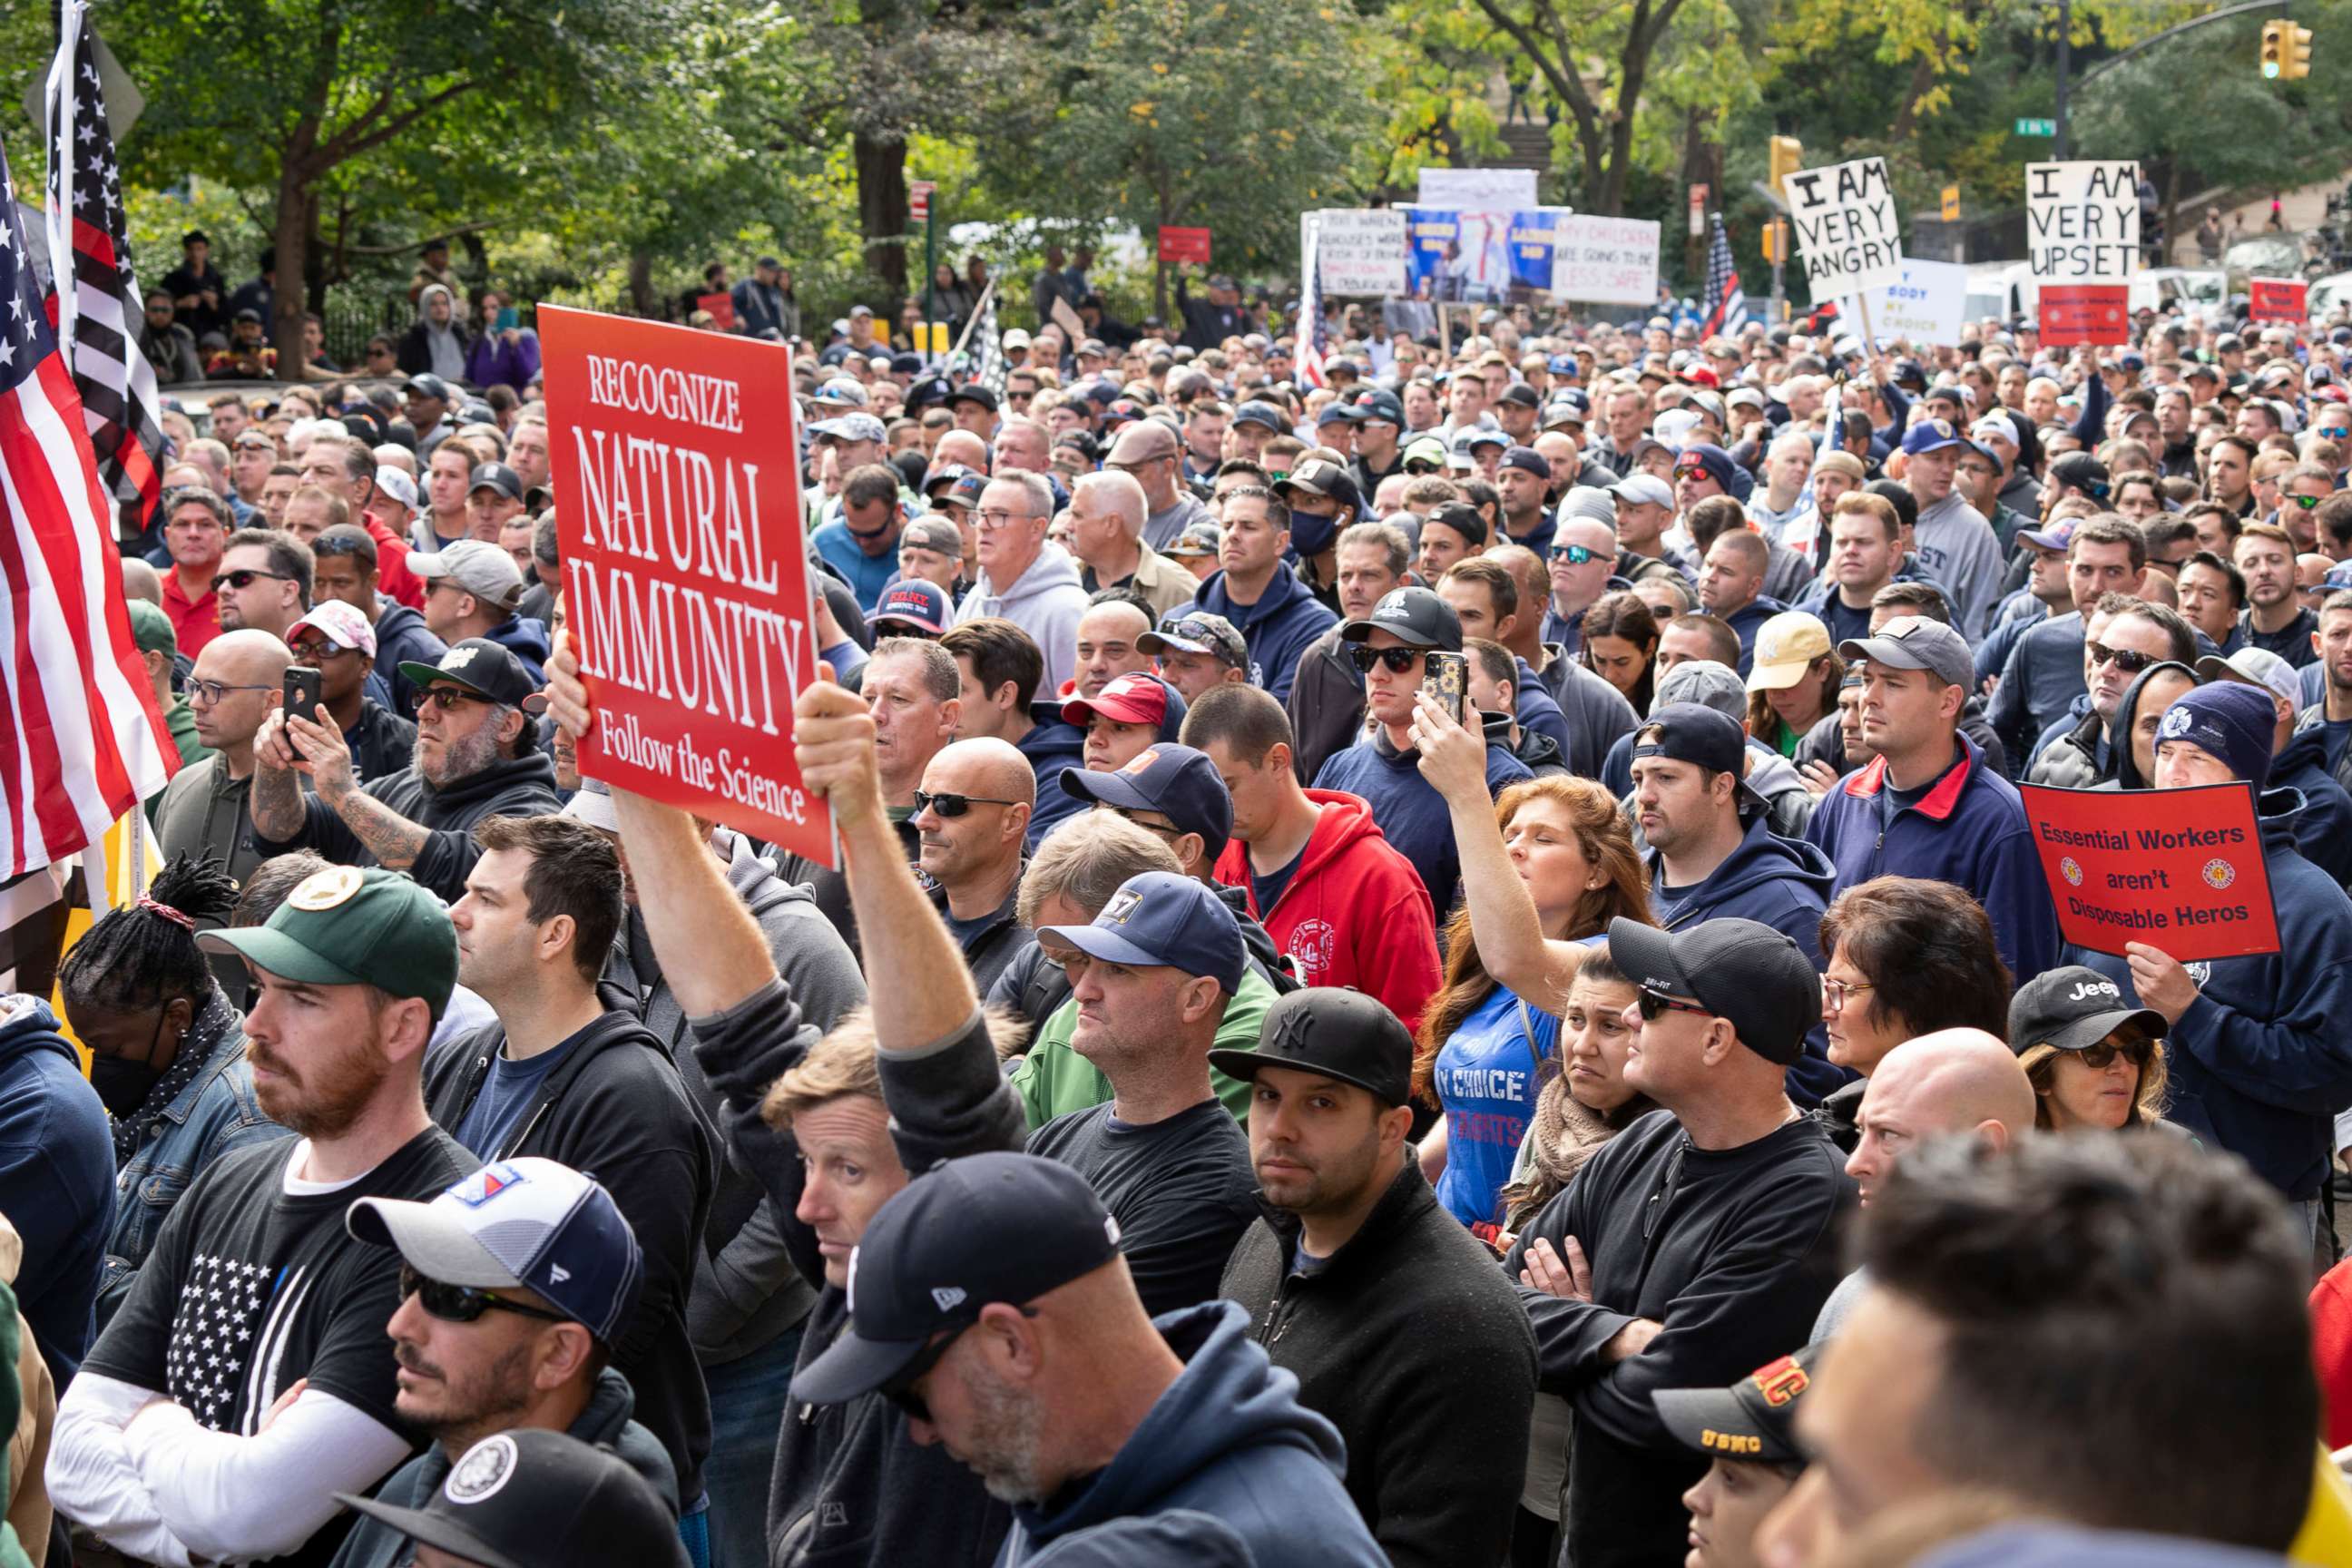 PHOTO: New York Fire Department employees and others protest outside Gracie Mansion, the official residence of the mayor, in New York on Oct. 28, 2021, to protest the mandate almost every municipal worker be vaccinated against COVID-19.